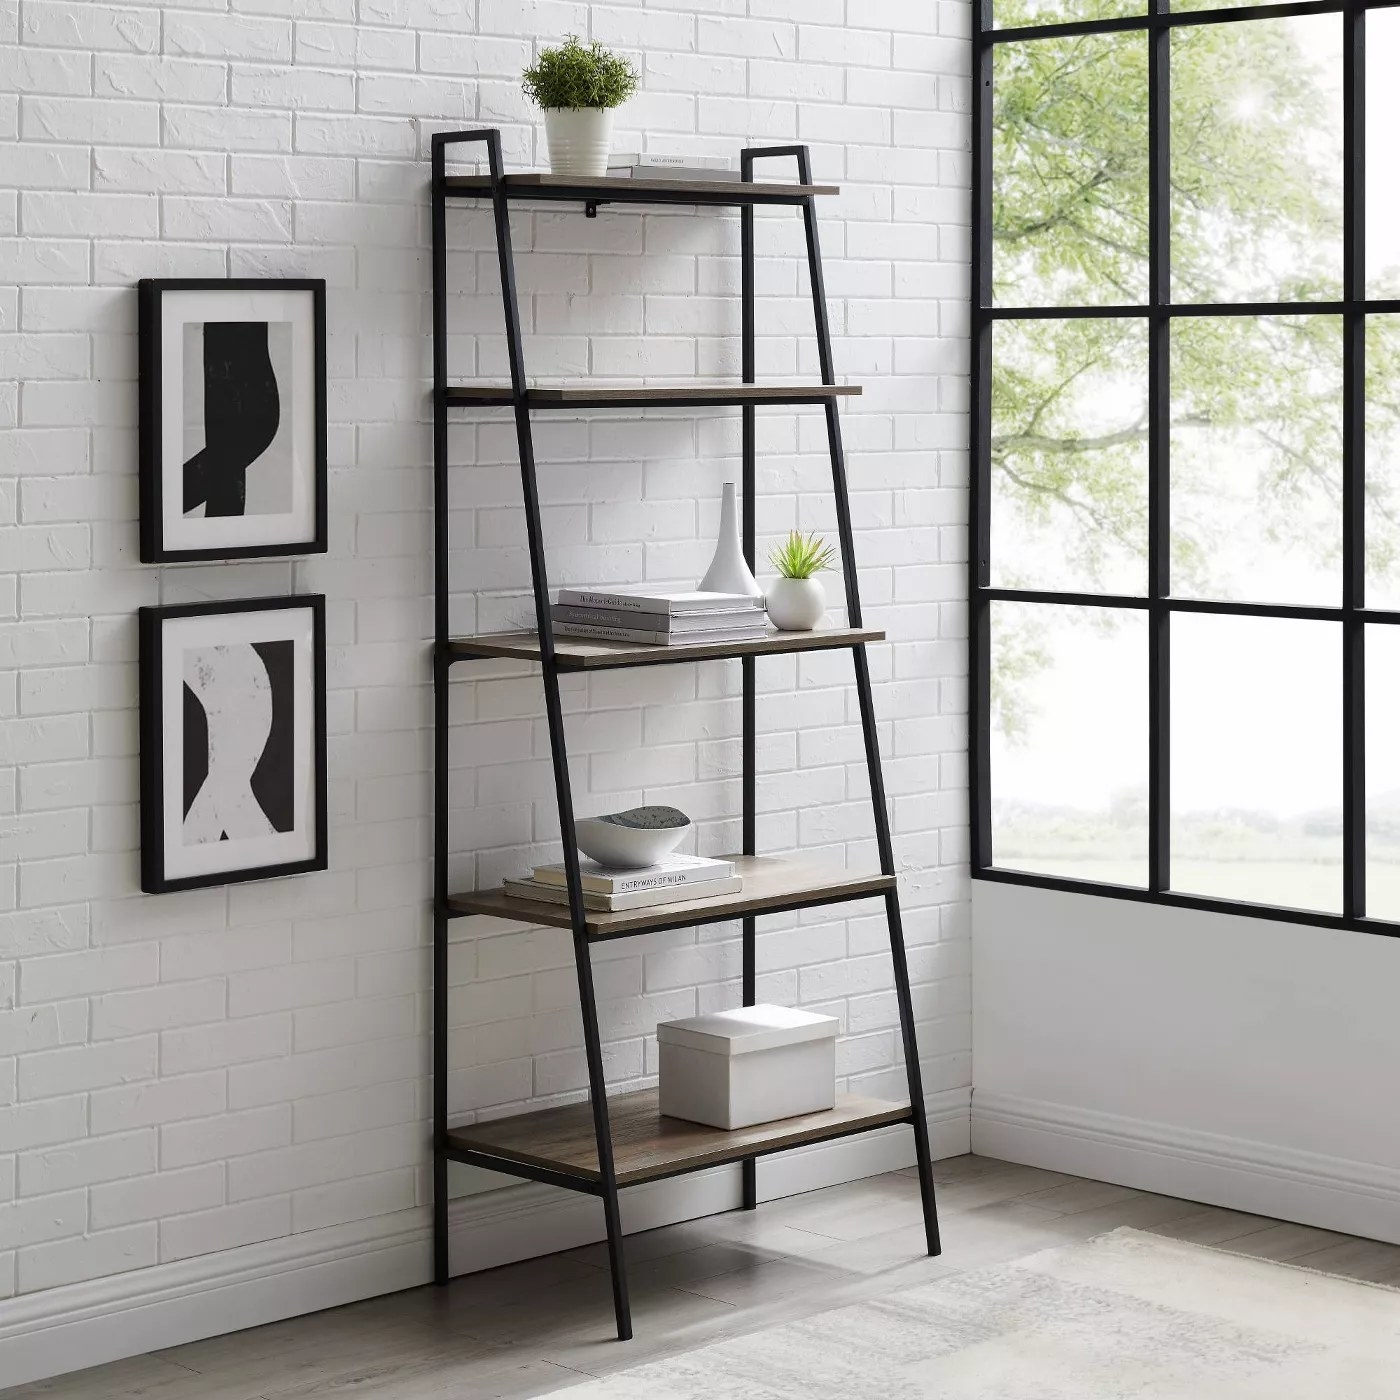 The gray wash ladder